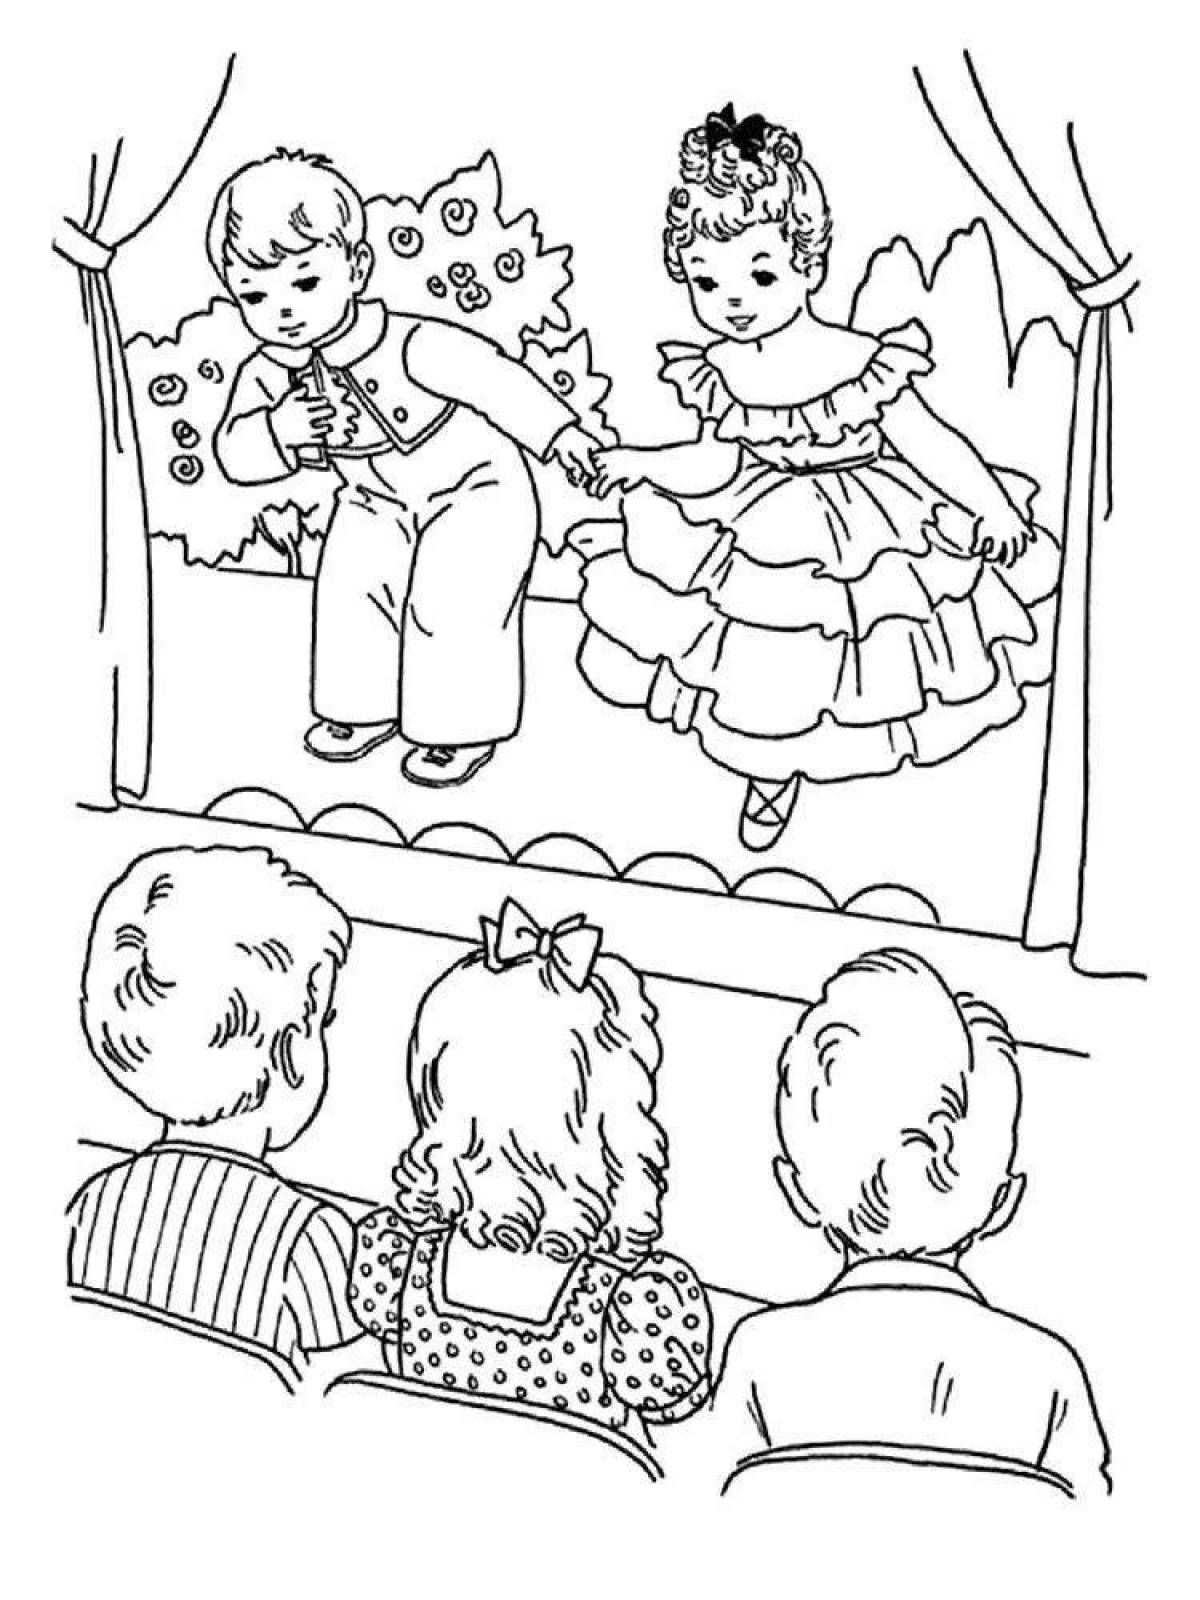 Fancy theater coloring pages for kids